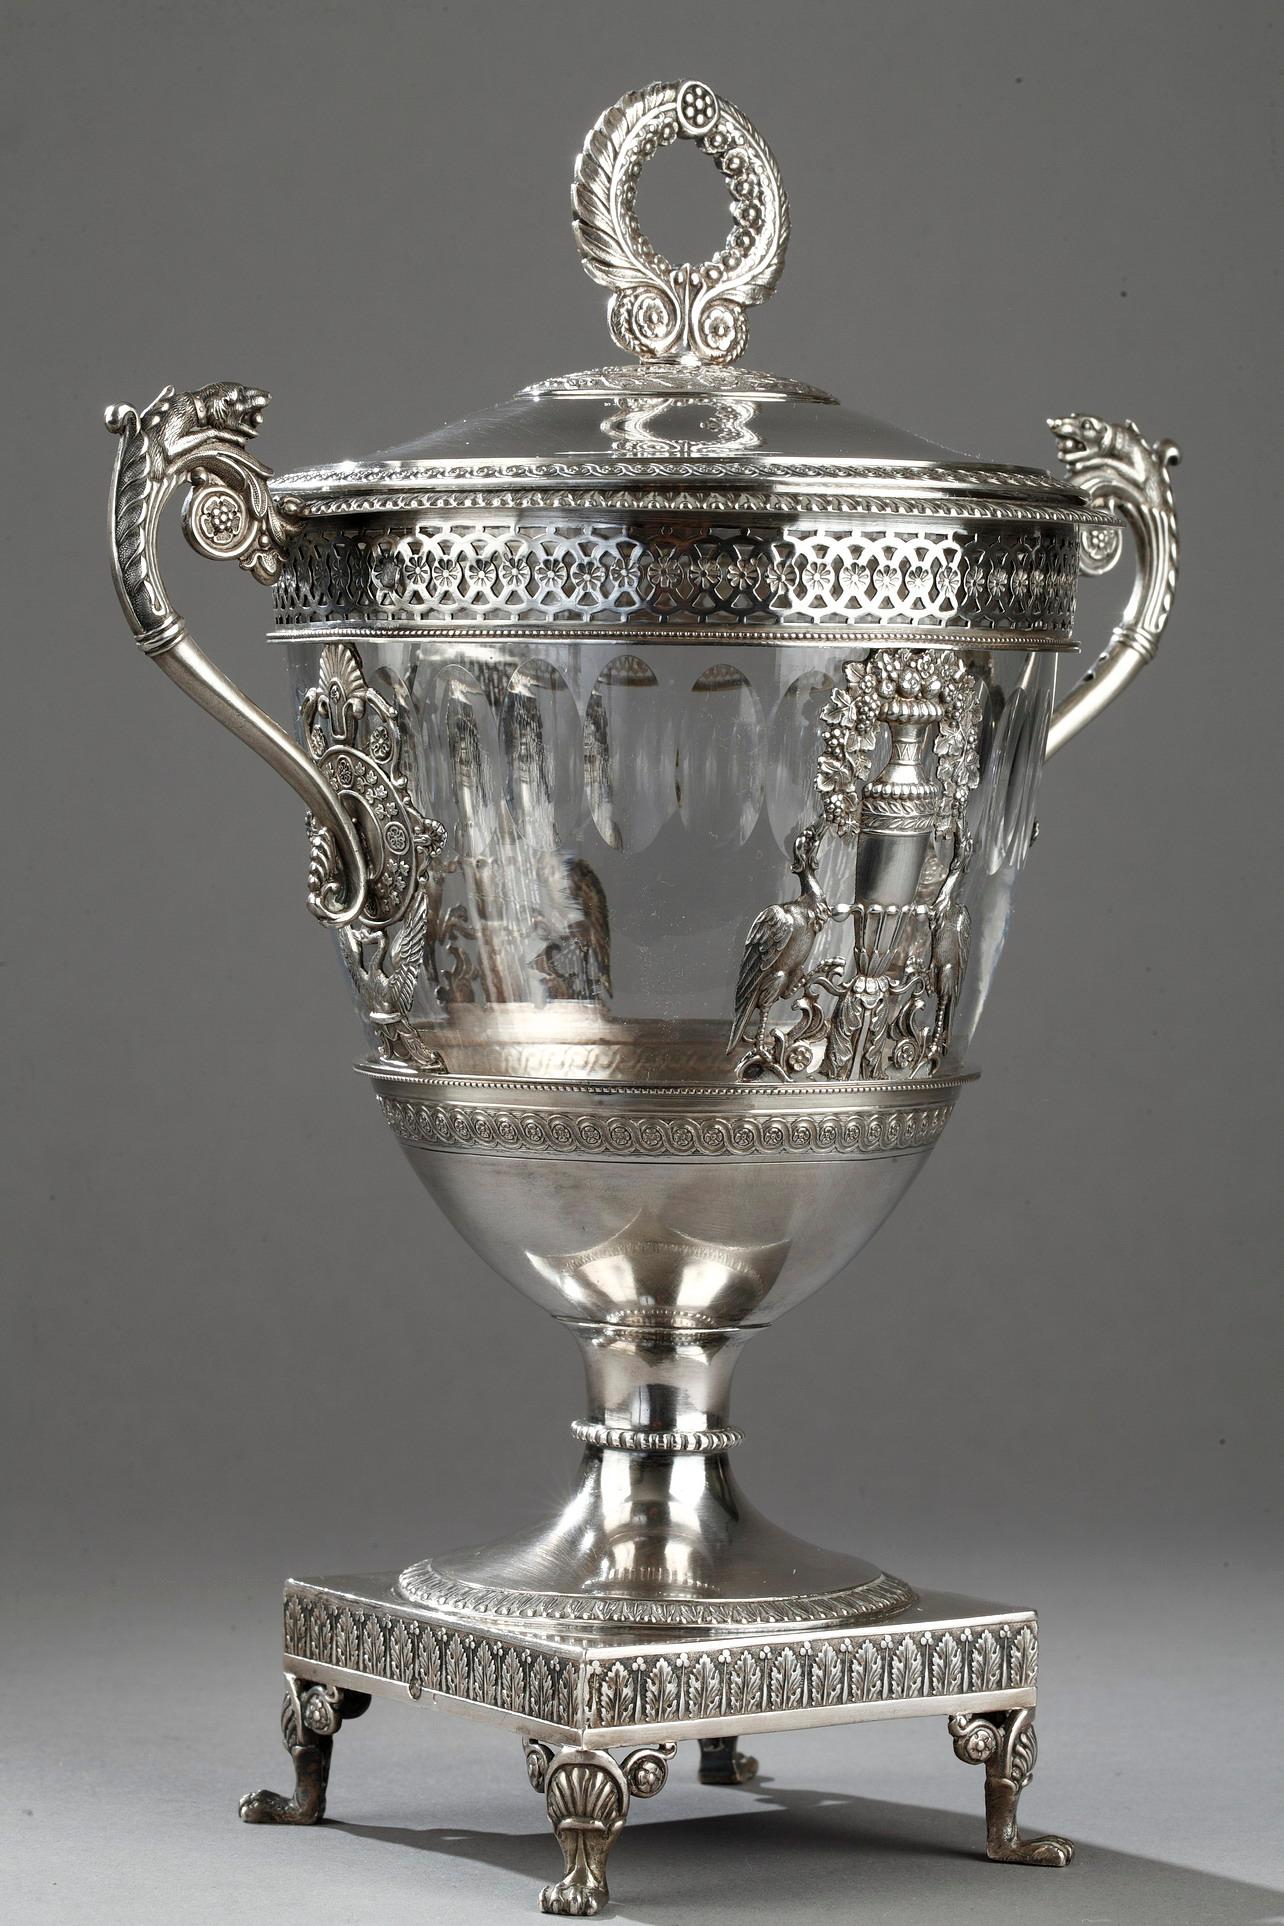 Lightly tapered candy dish in silver and crystal. The rim is ornamented with an openwork geometric frieze, and the paunch features a sculpted silver balustrade vase and two birds standing facing each other on either side of the vase. The birds are